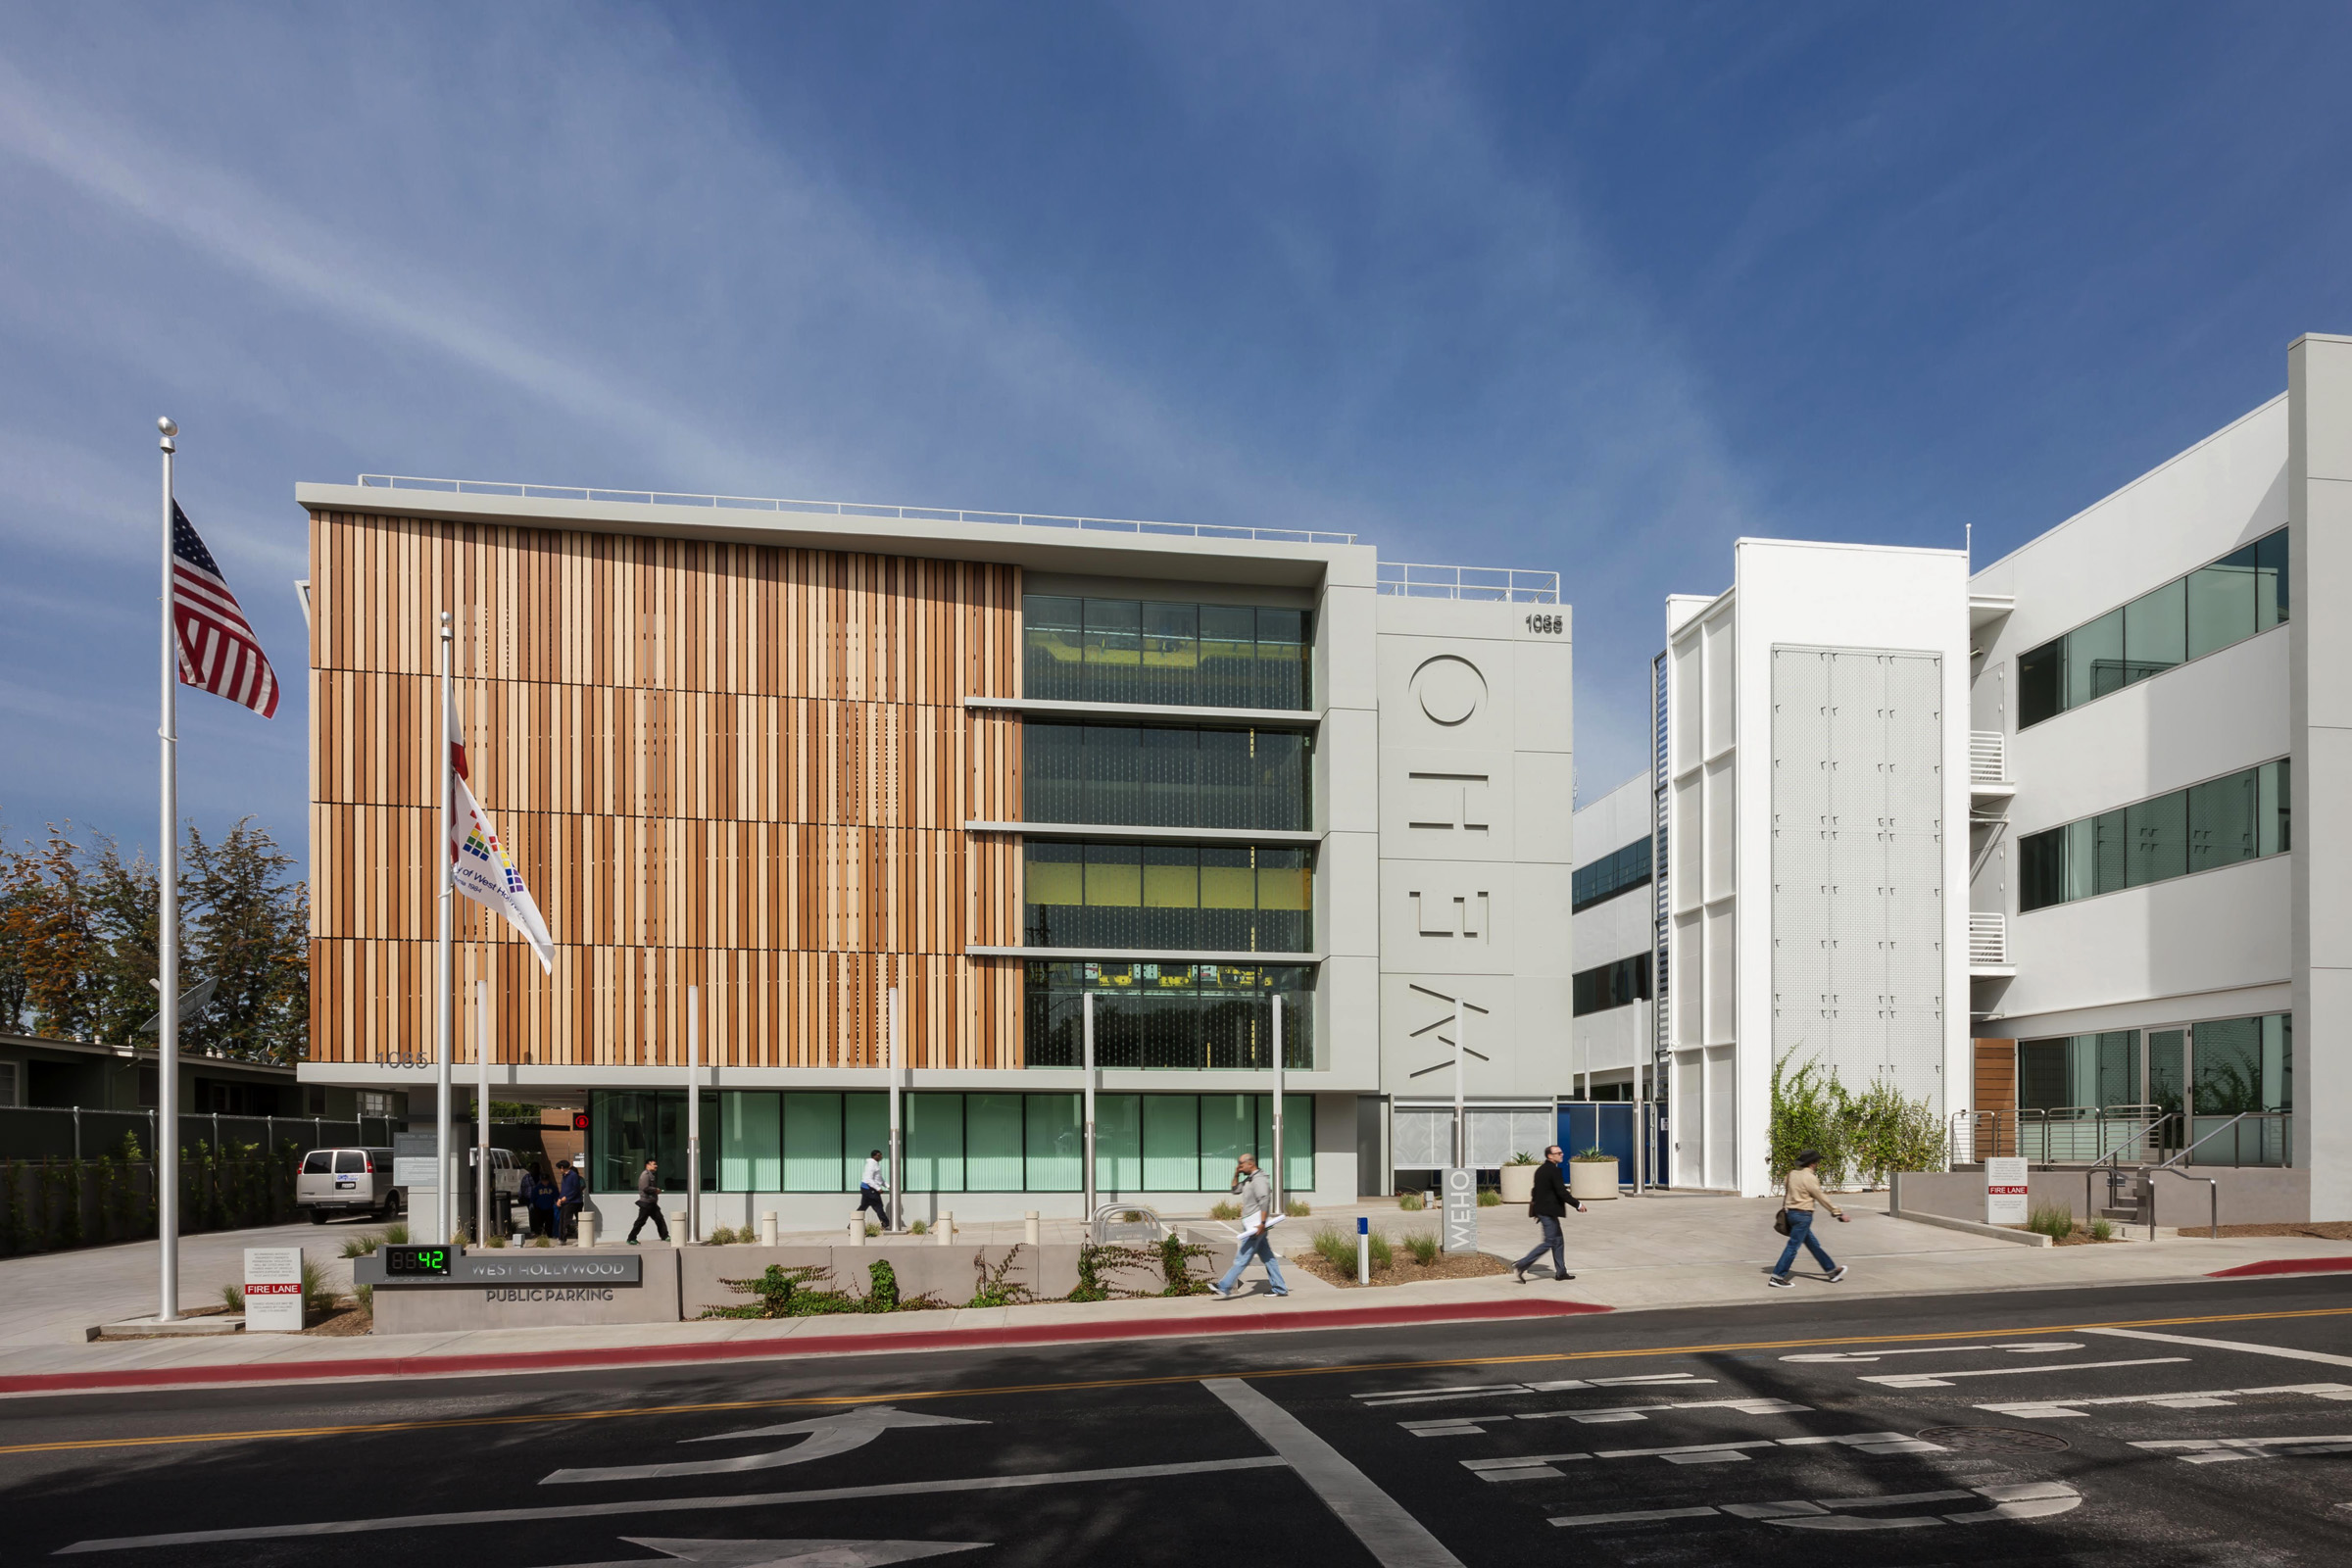 West Hollywood Automated Parking Garage received an Award of Honor at the AIAOC Design Awards.